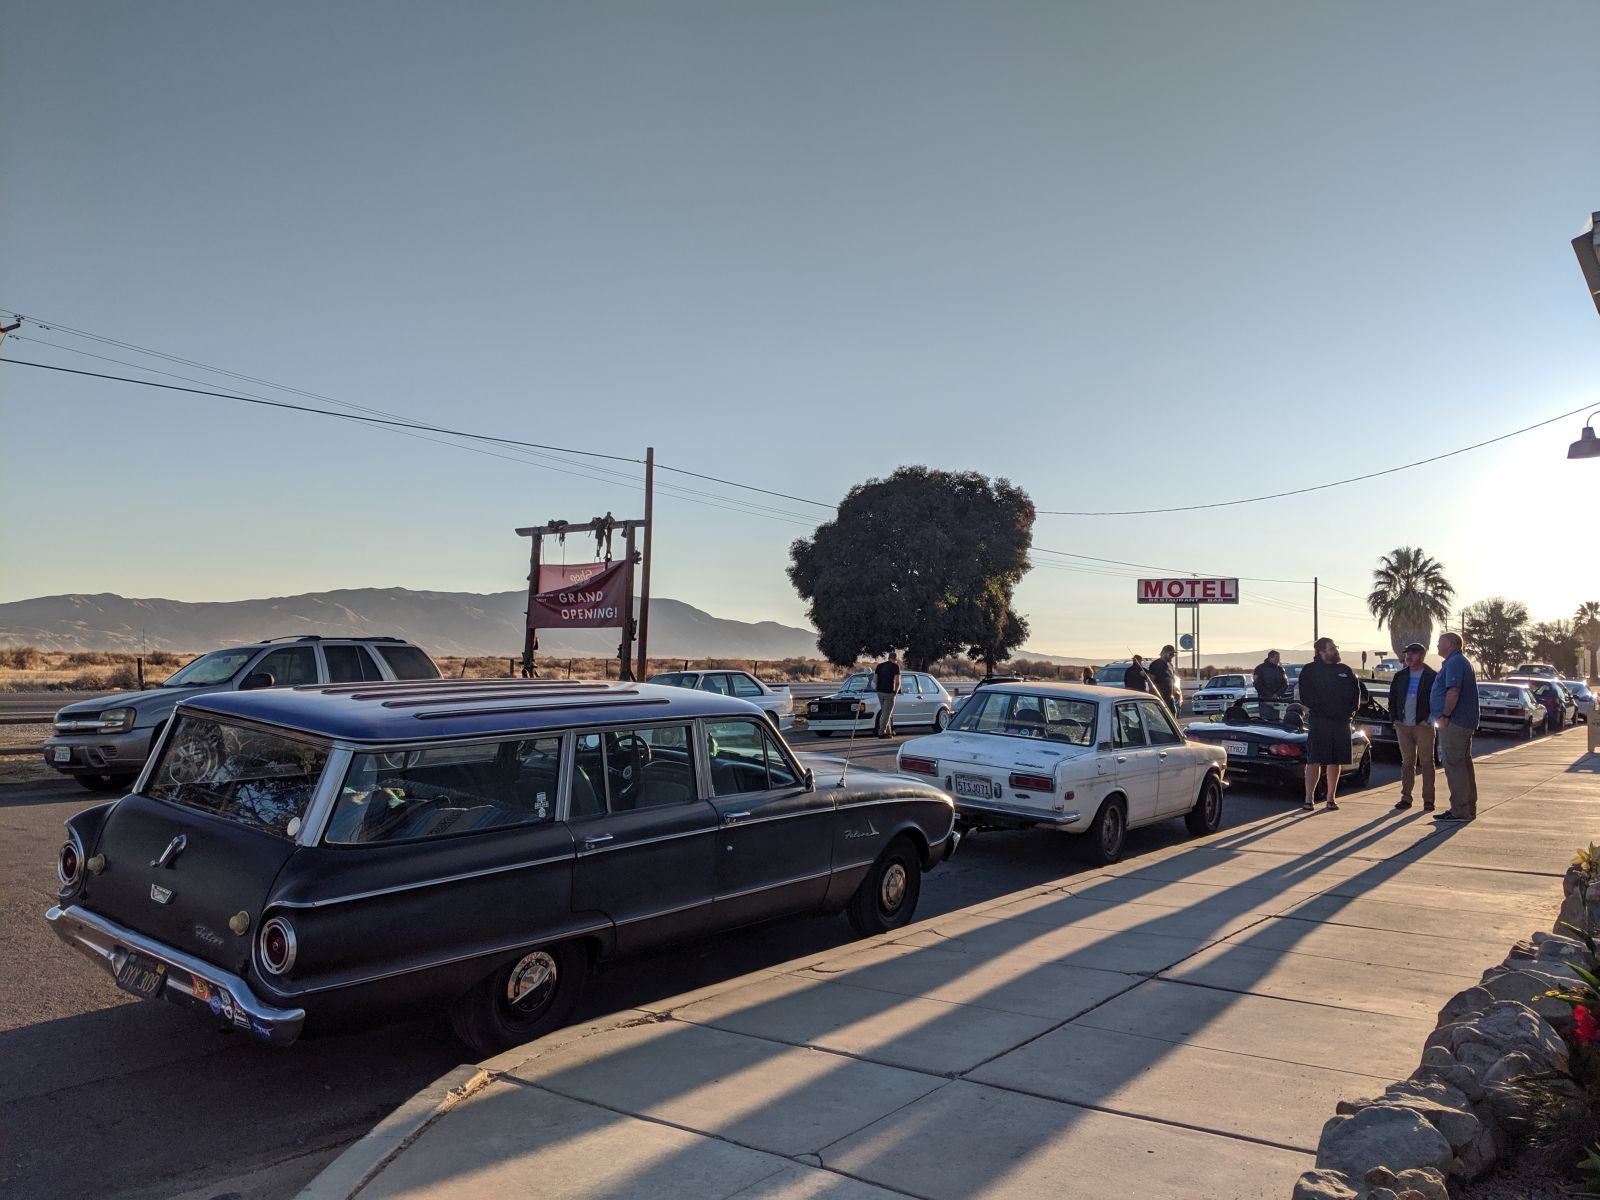  ‘61 Falcon, sleeper 510, and general morning glory